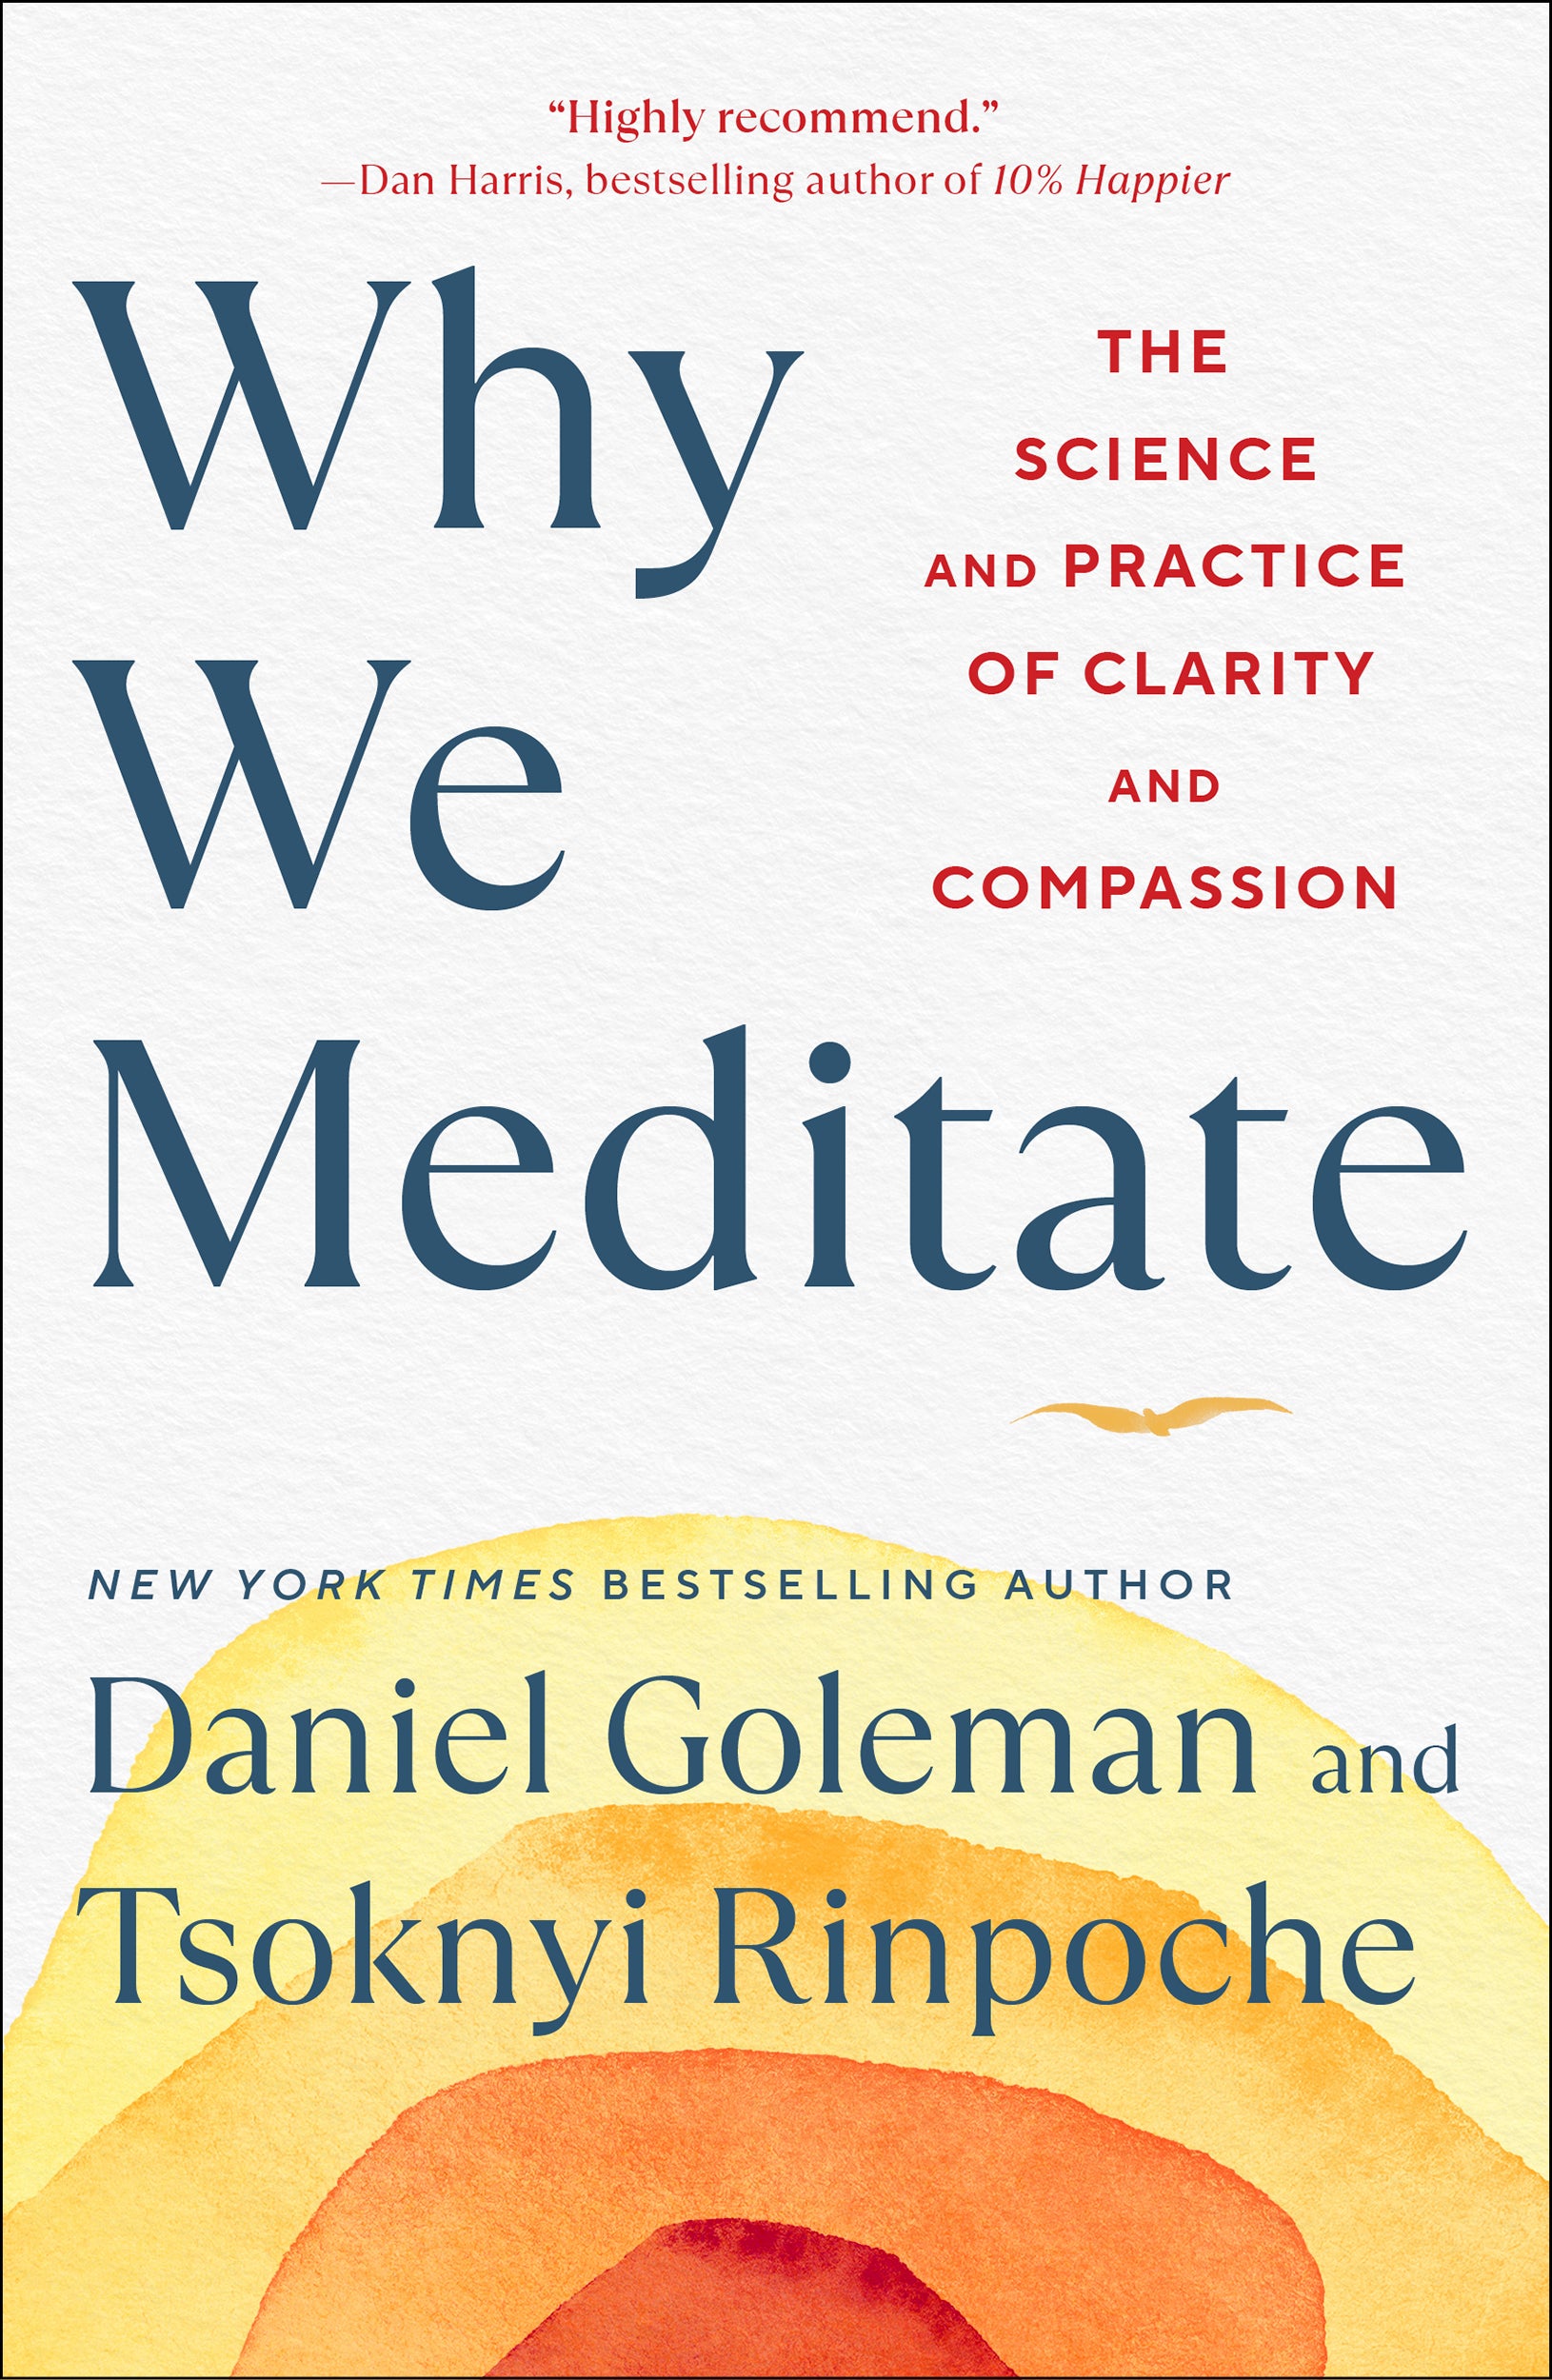 Book cover: "We we meditate" by Daniel Goleman and Tsoknyi Rinpoche.